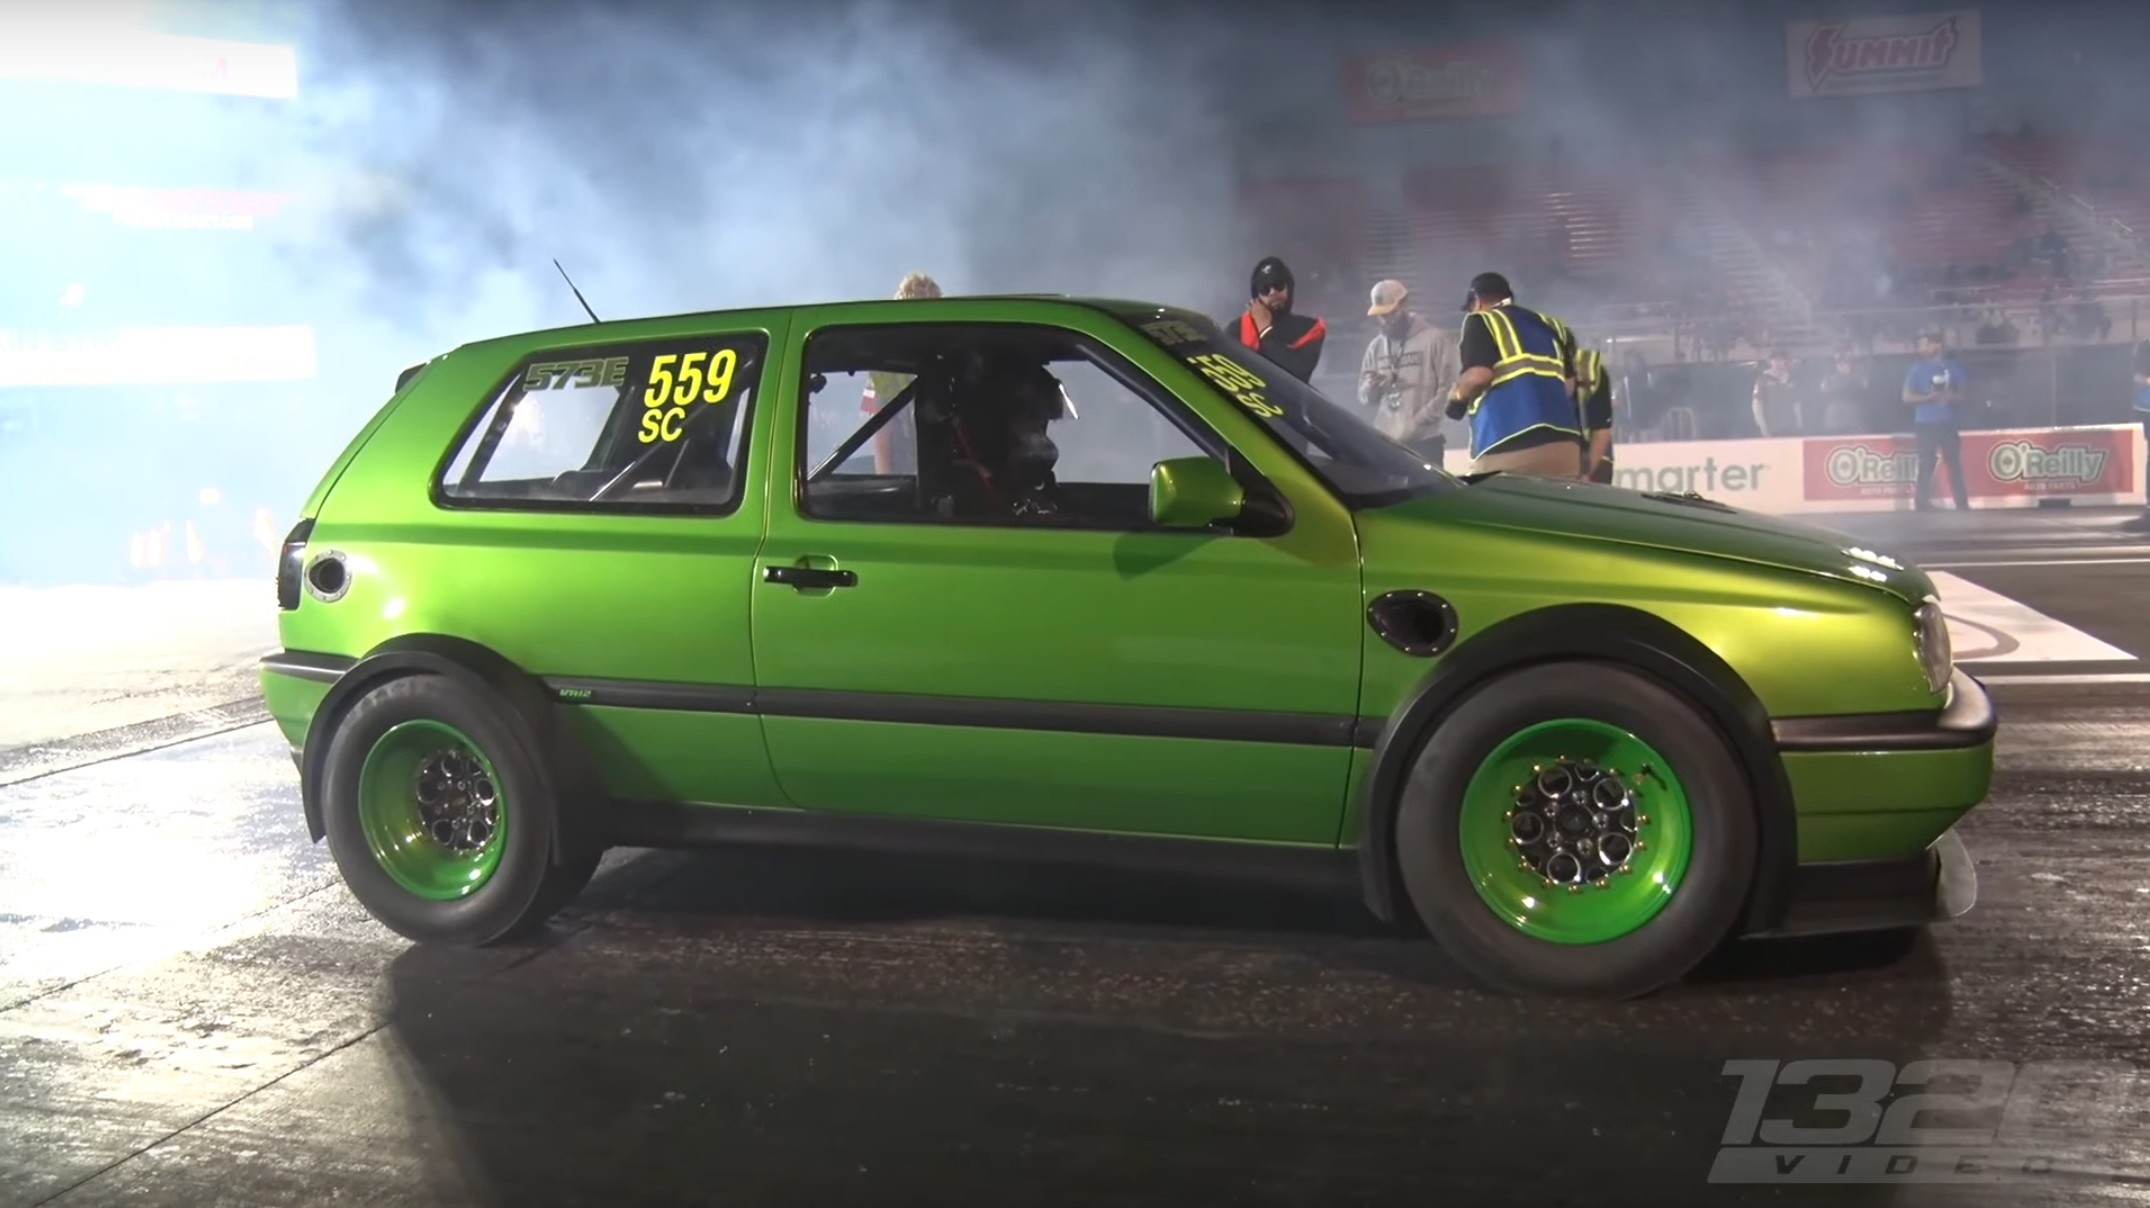 Twin-Engine VW Golf Wreaks Havoc at Texas Drag Racing Event With 2,000 HP -  autoevolution